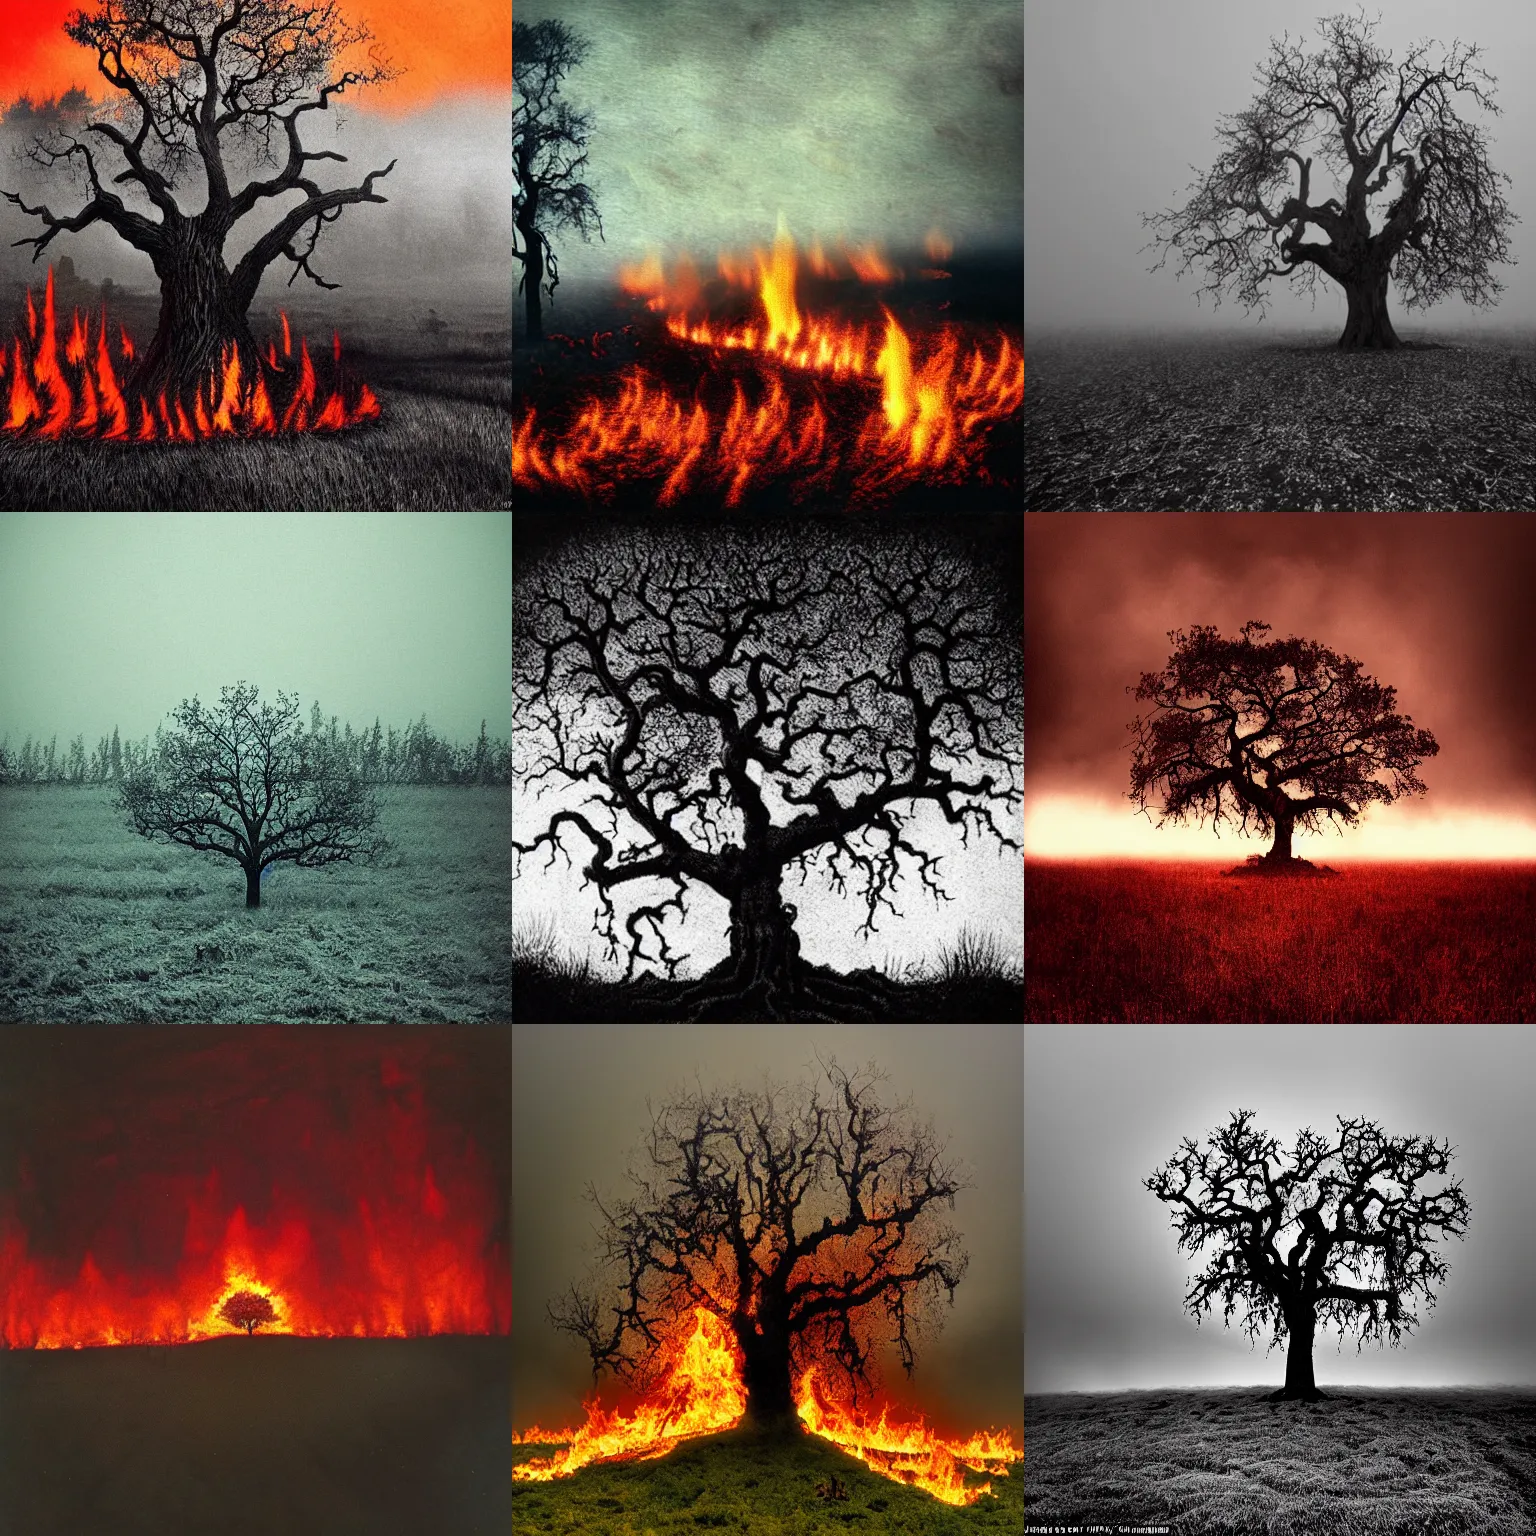 Prompt: an oak tree in an open field aflame, hellish images, hellfire, still, fog in background, dantes inferno, black metal album cover, evil, horror